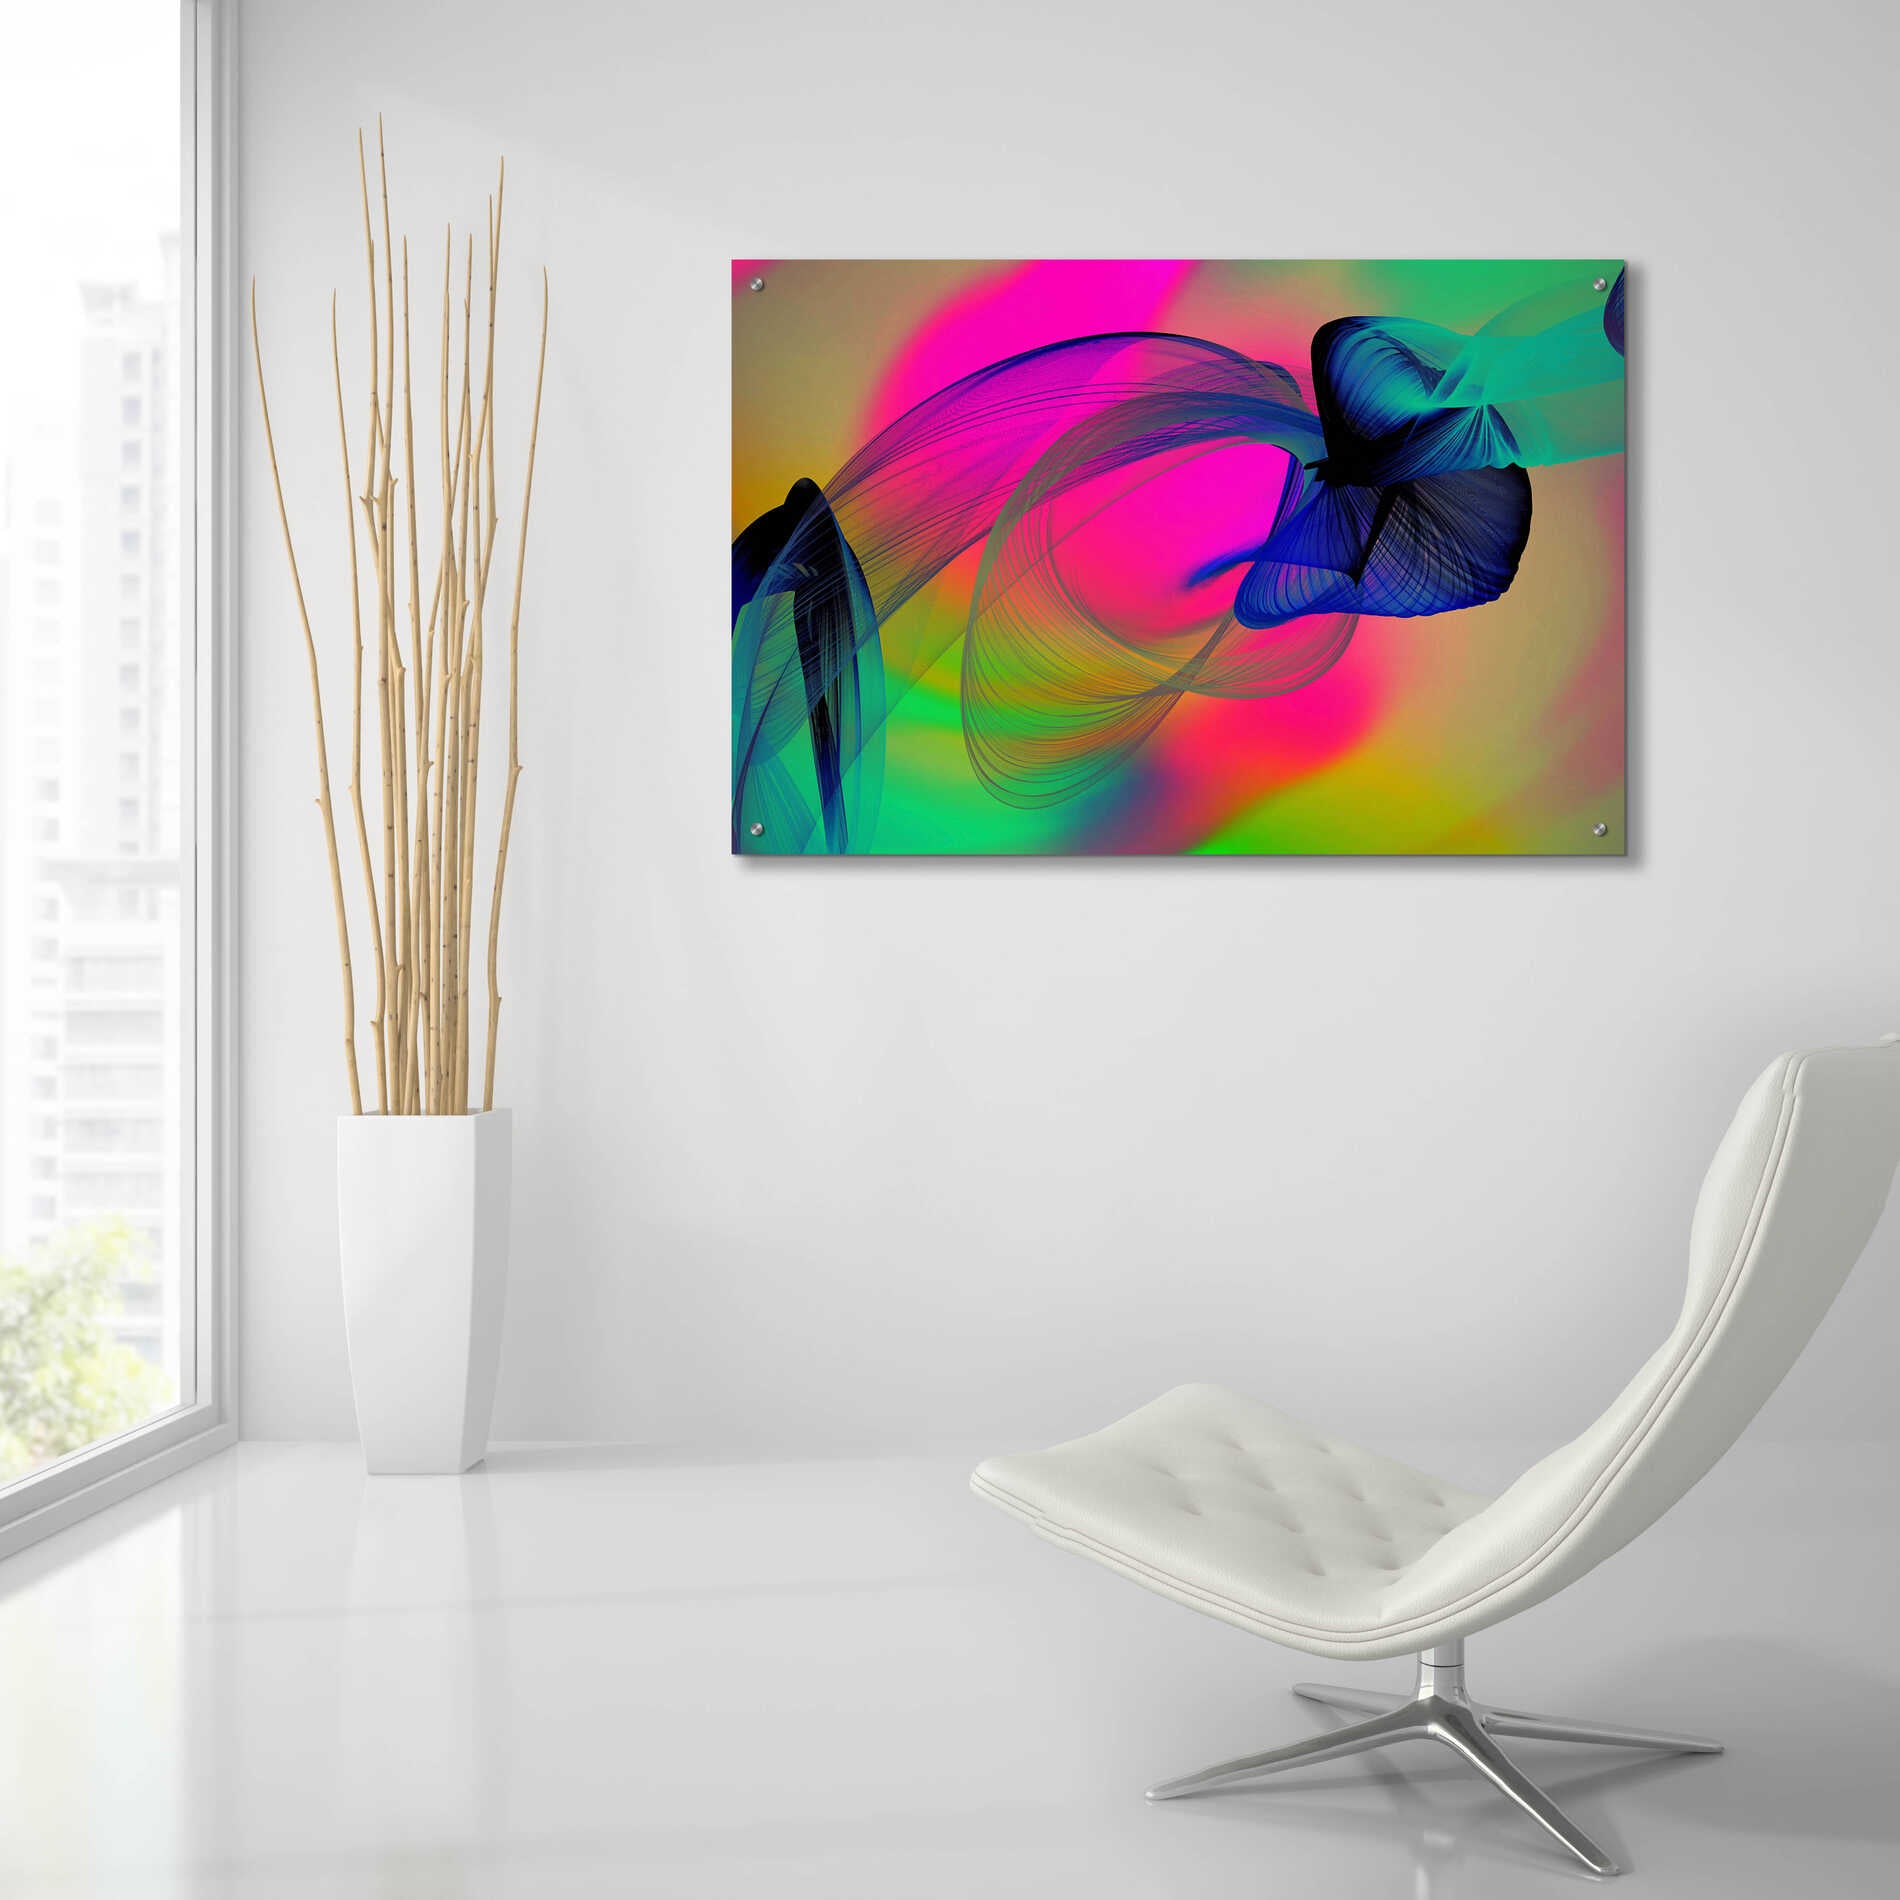 Epic Art 'Color In The Lines 22' by Irena Orlov, Acrylic Glass Wall Art,36x24